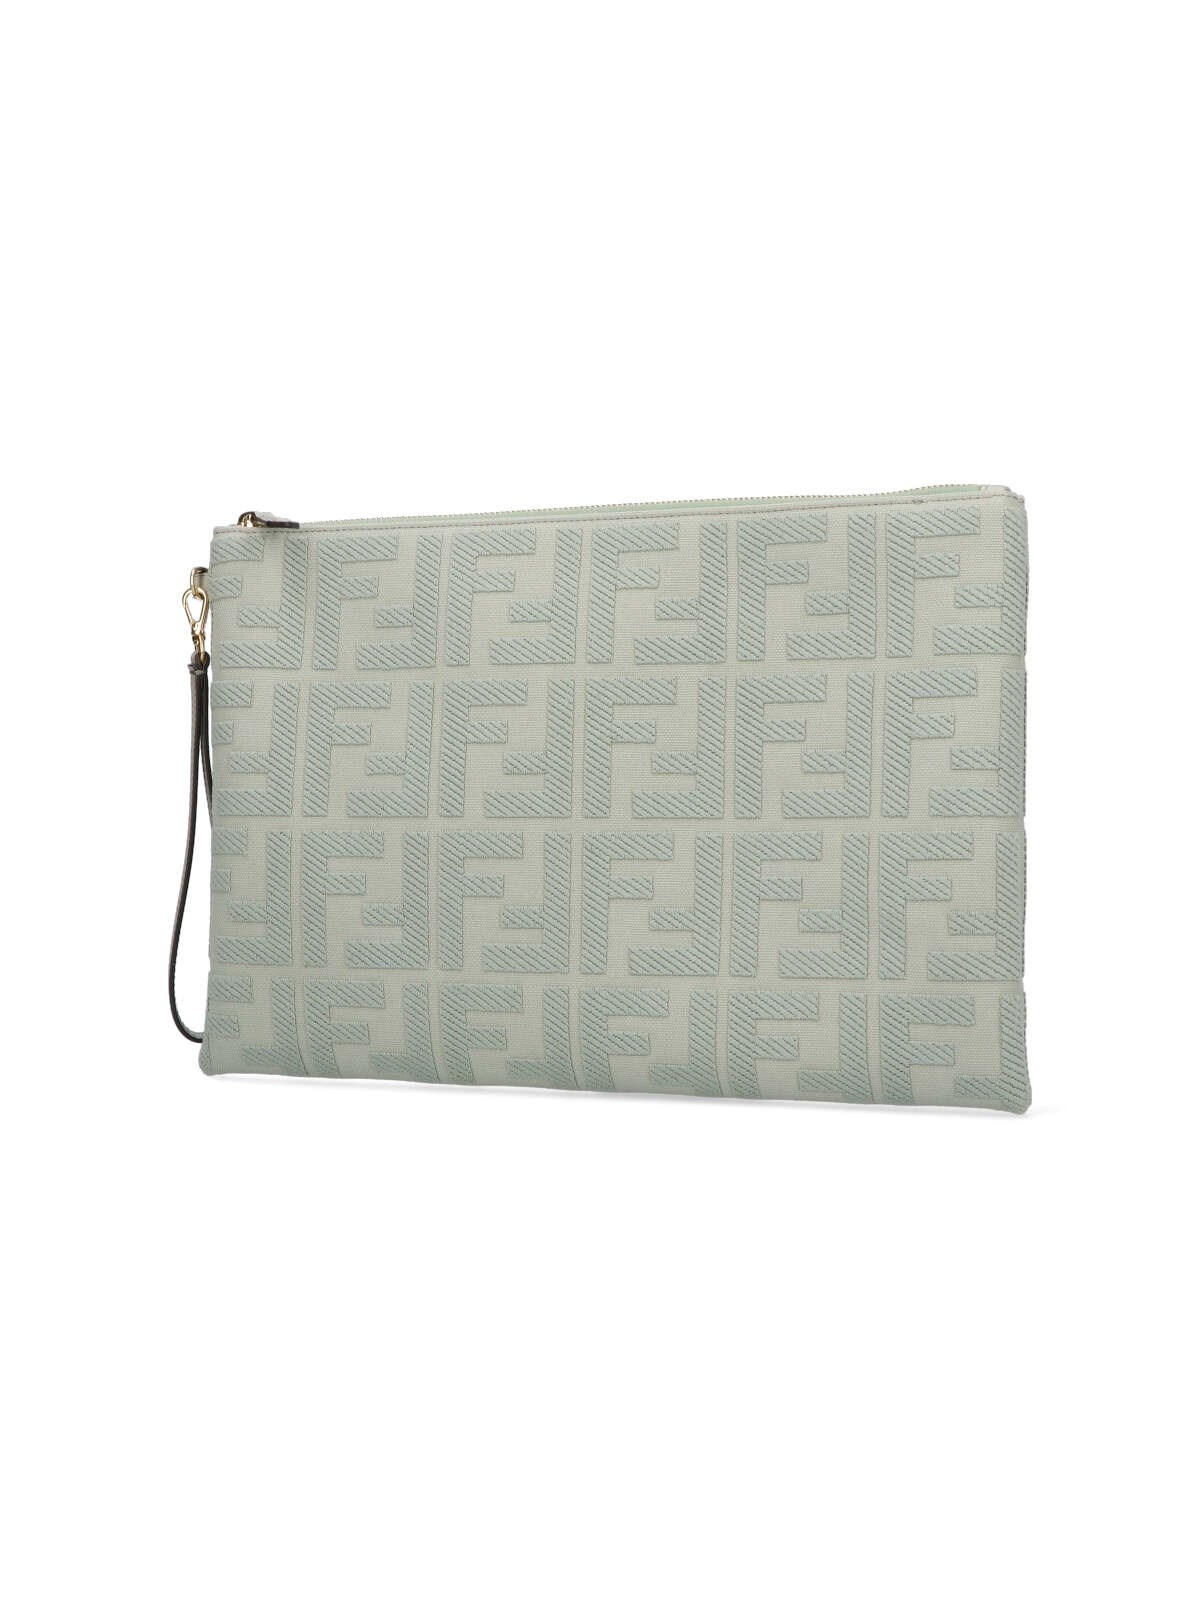 'FF' LARGE FLAT POUCH - 2